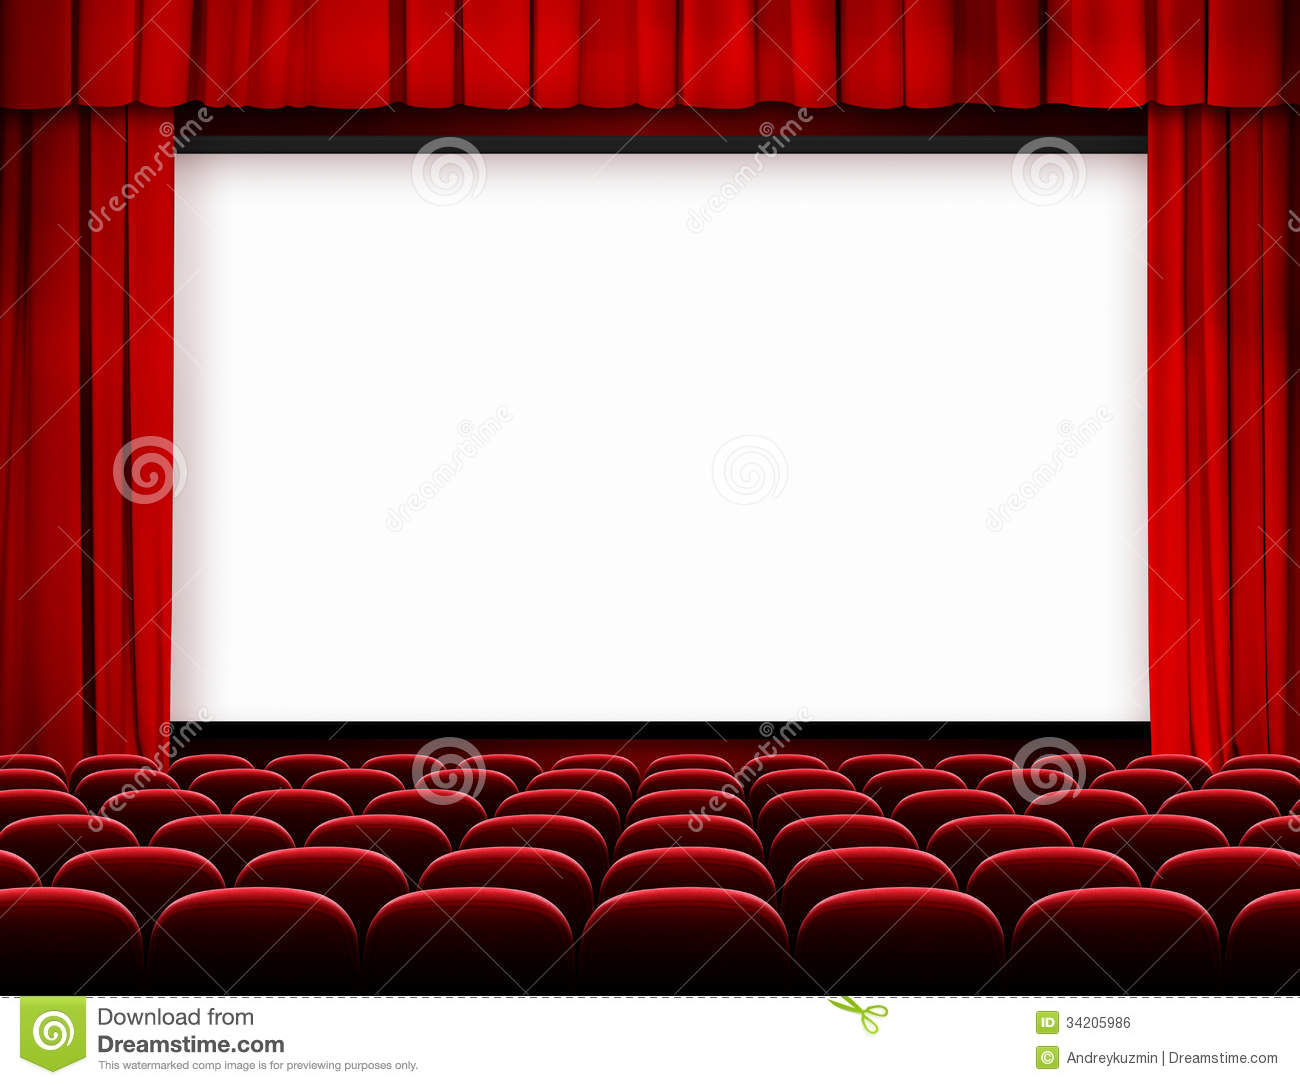 Cinema Screen With Red Curtains And Seats Royalty Free Stock Image